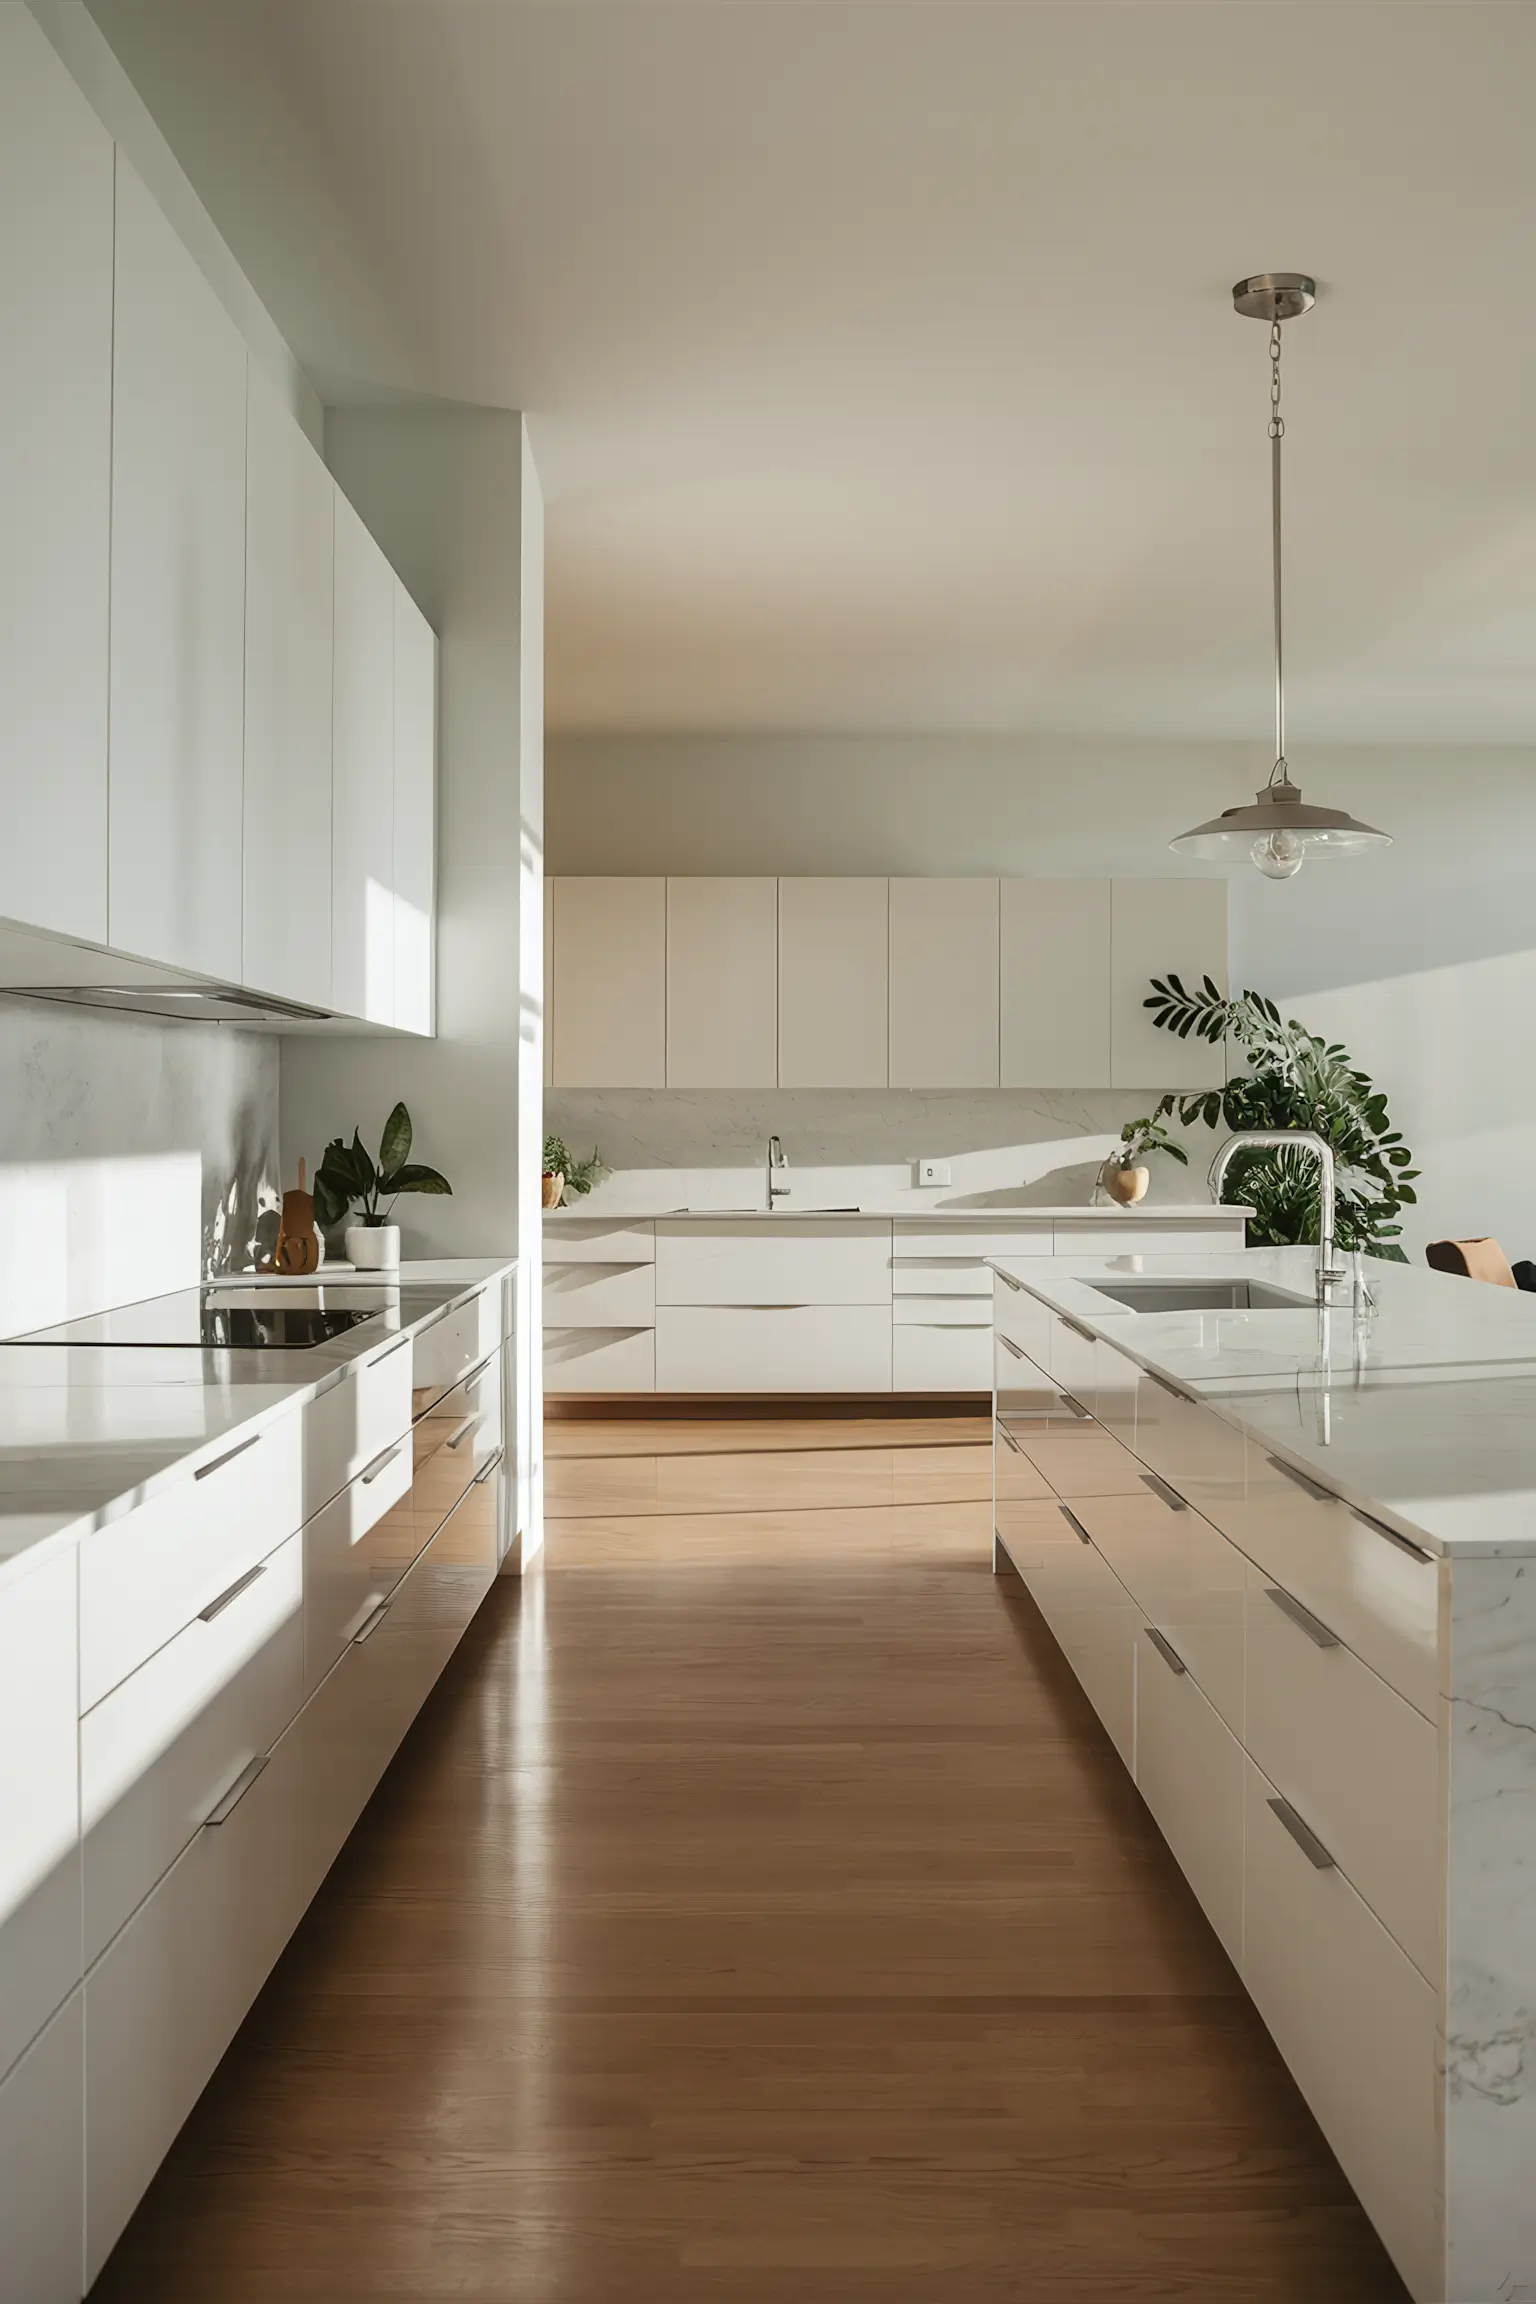 Minimalistic white kitchen with timeless white cabinets and sleek handles.